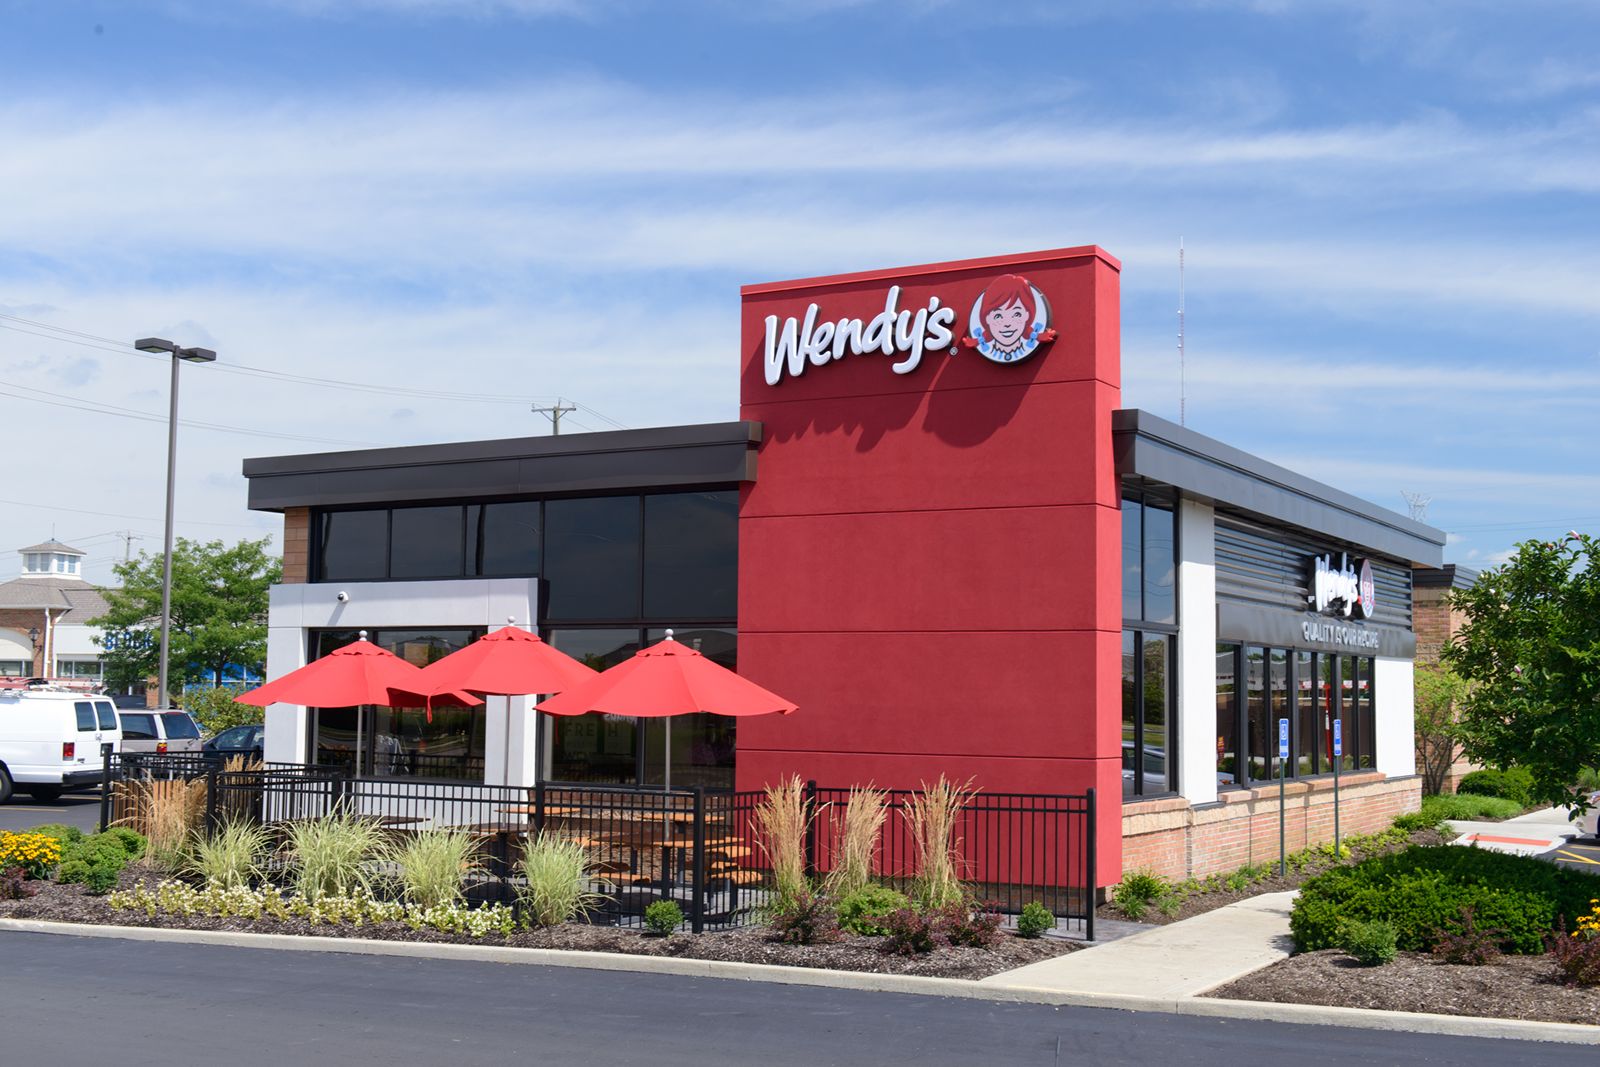 Delight Restaurant Group Announces Acquisition of 44 Wendy's Restaurants From the Wendy's Company